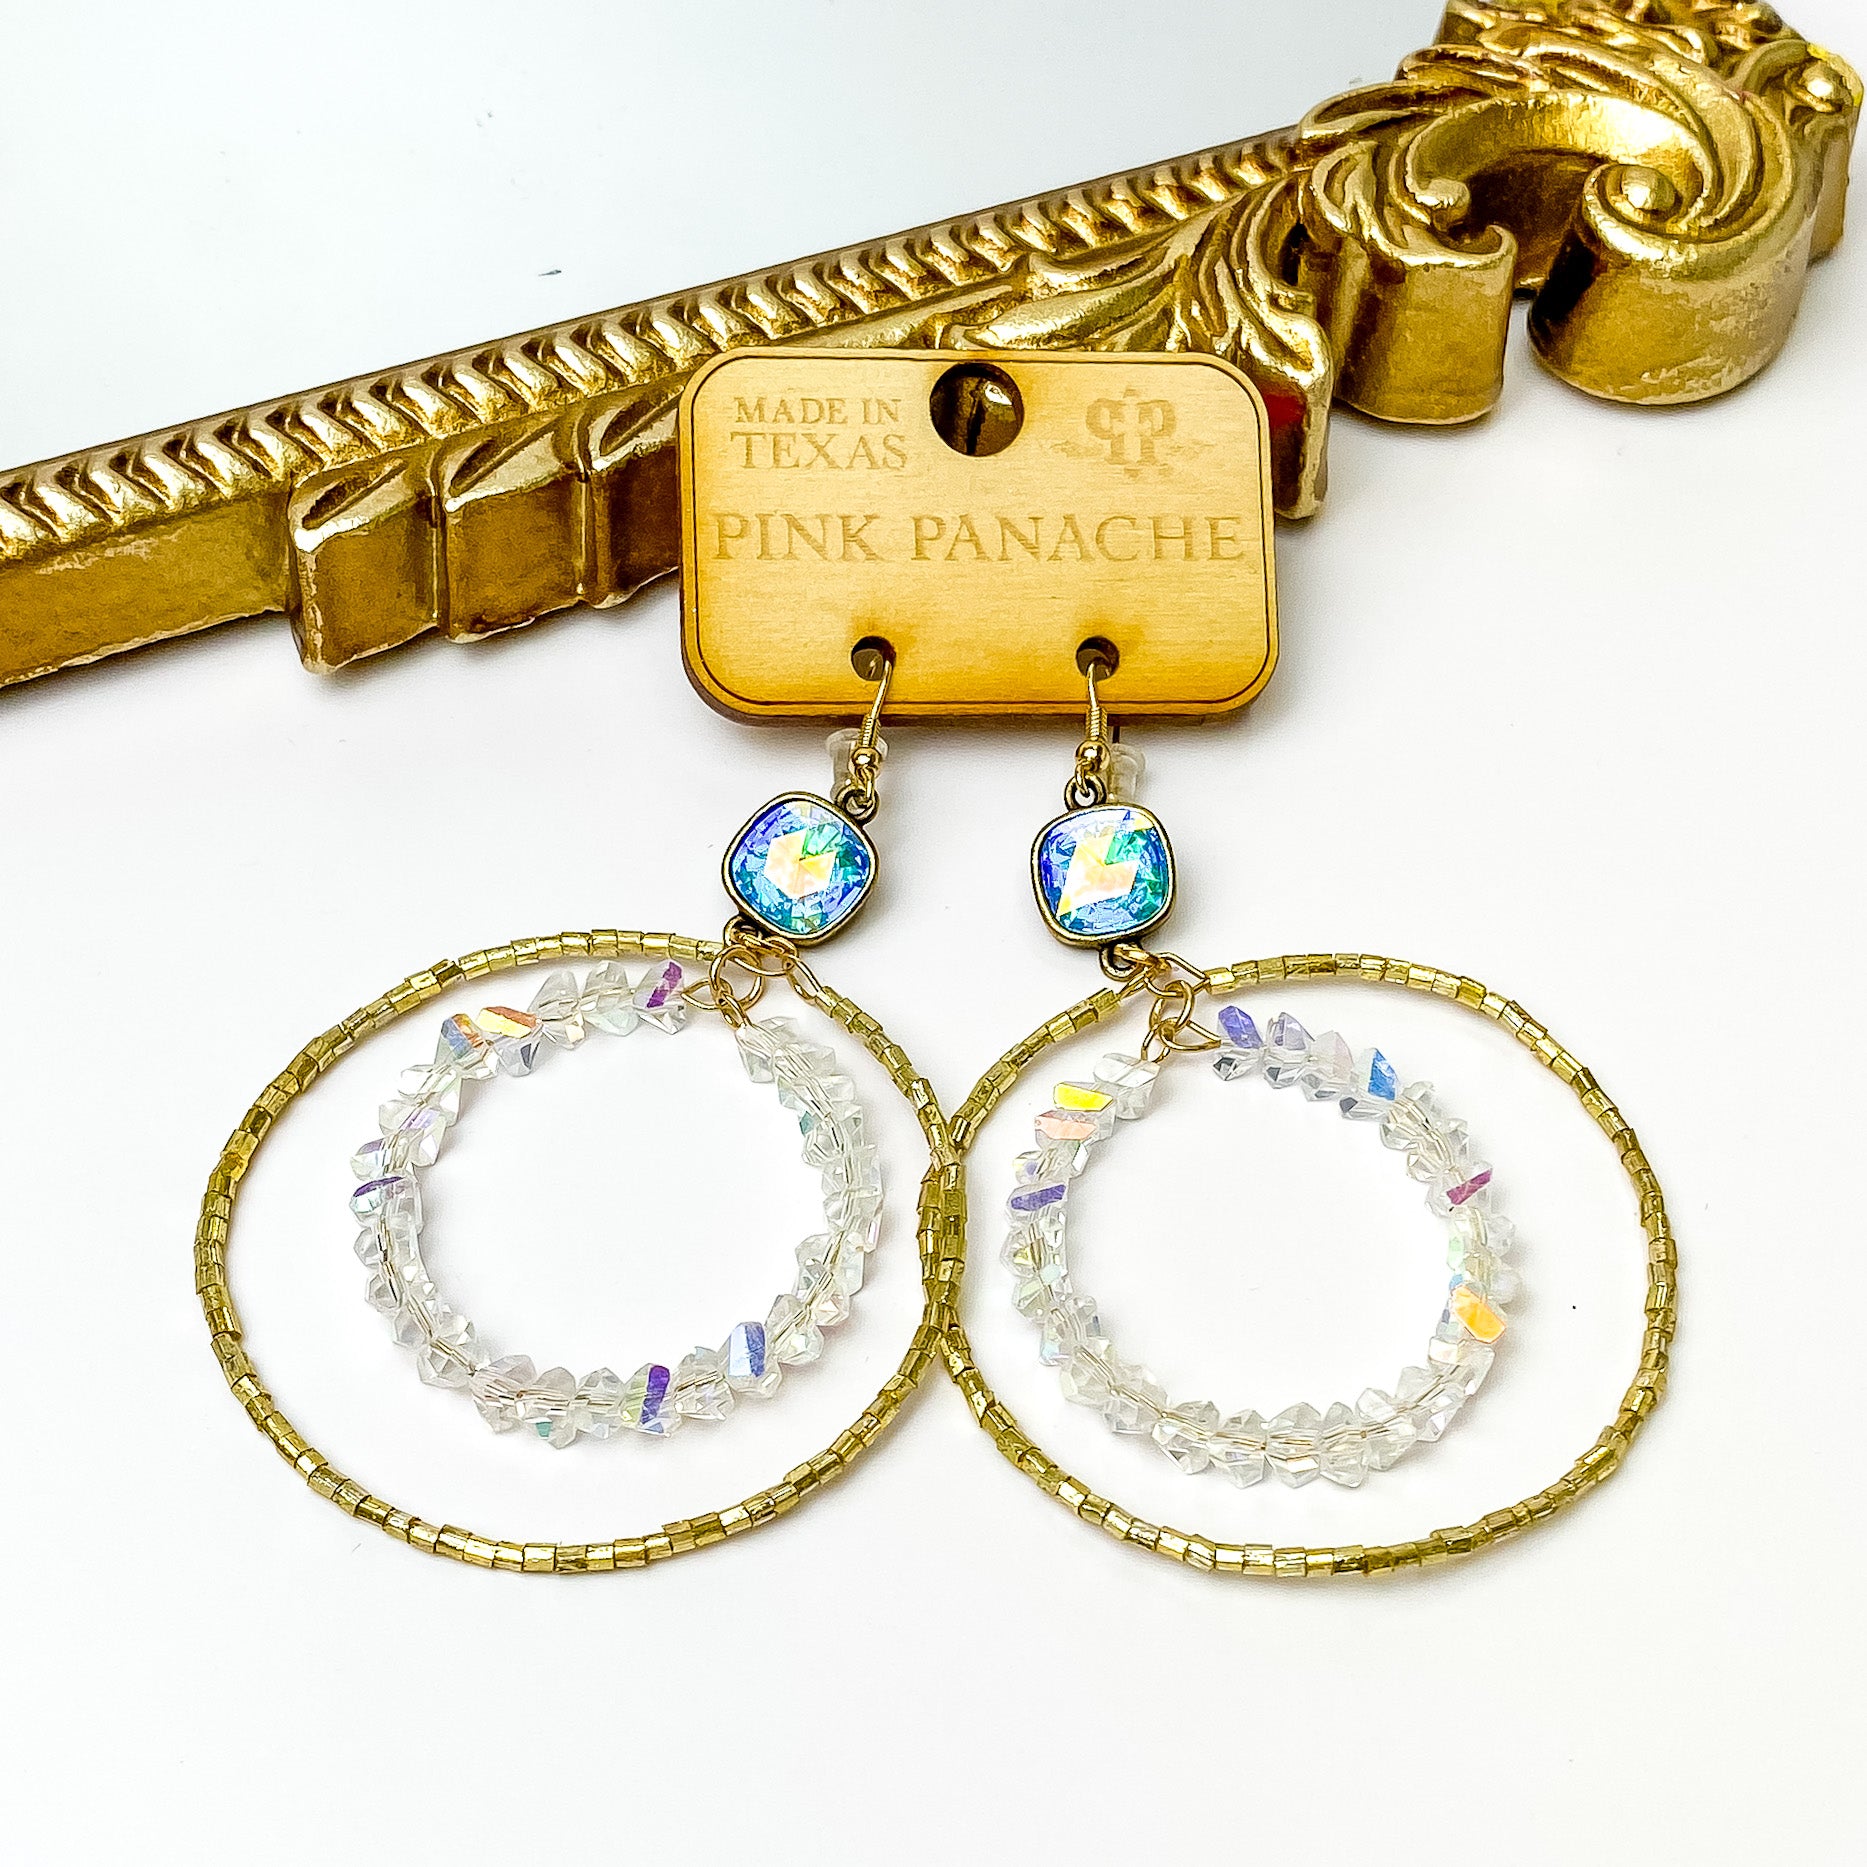 Ab cushion cut crystal drop earrings with a double circle pendant. One circle is gold beaded and the smaller one has clear ab crystal beads. These earrings are pictured on a wood earrings holder in front of a gold mirror on a white background. 